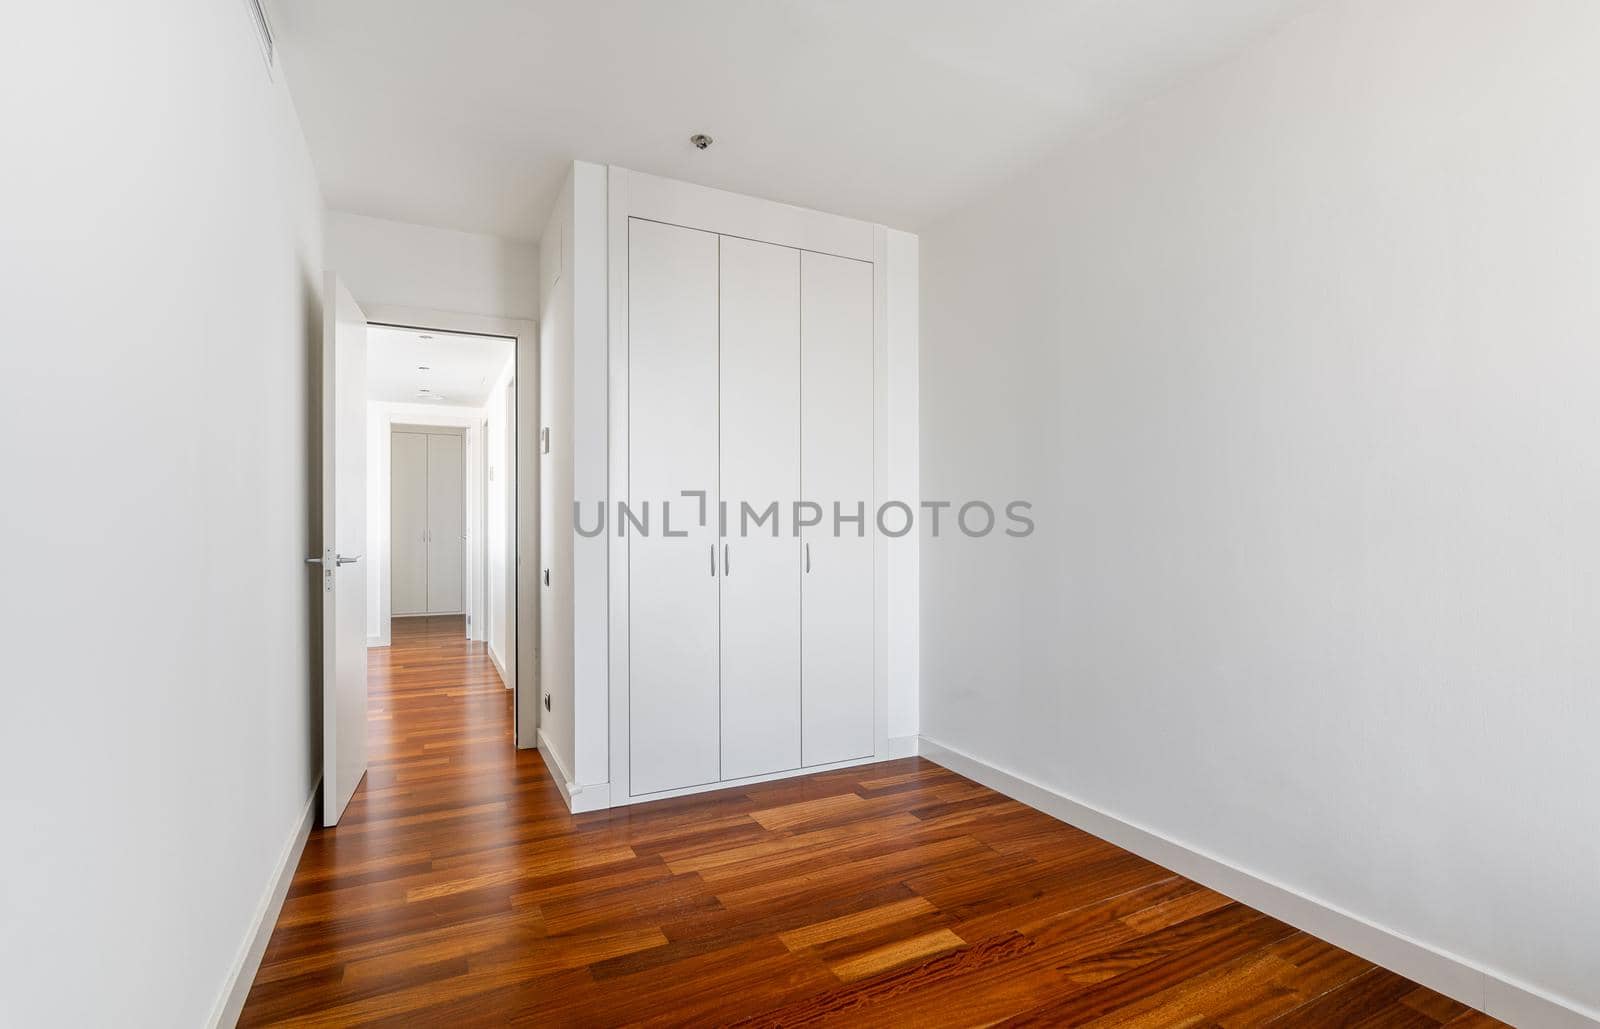 Interior of empty apartment, white room with built-in wardrobe, parquet floor and view to the hallway by apavlin